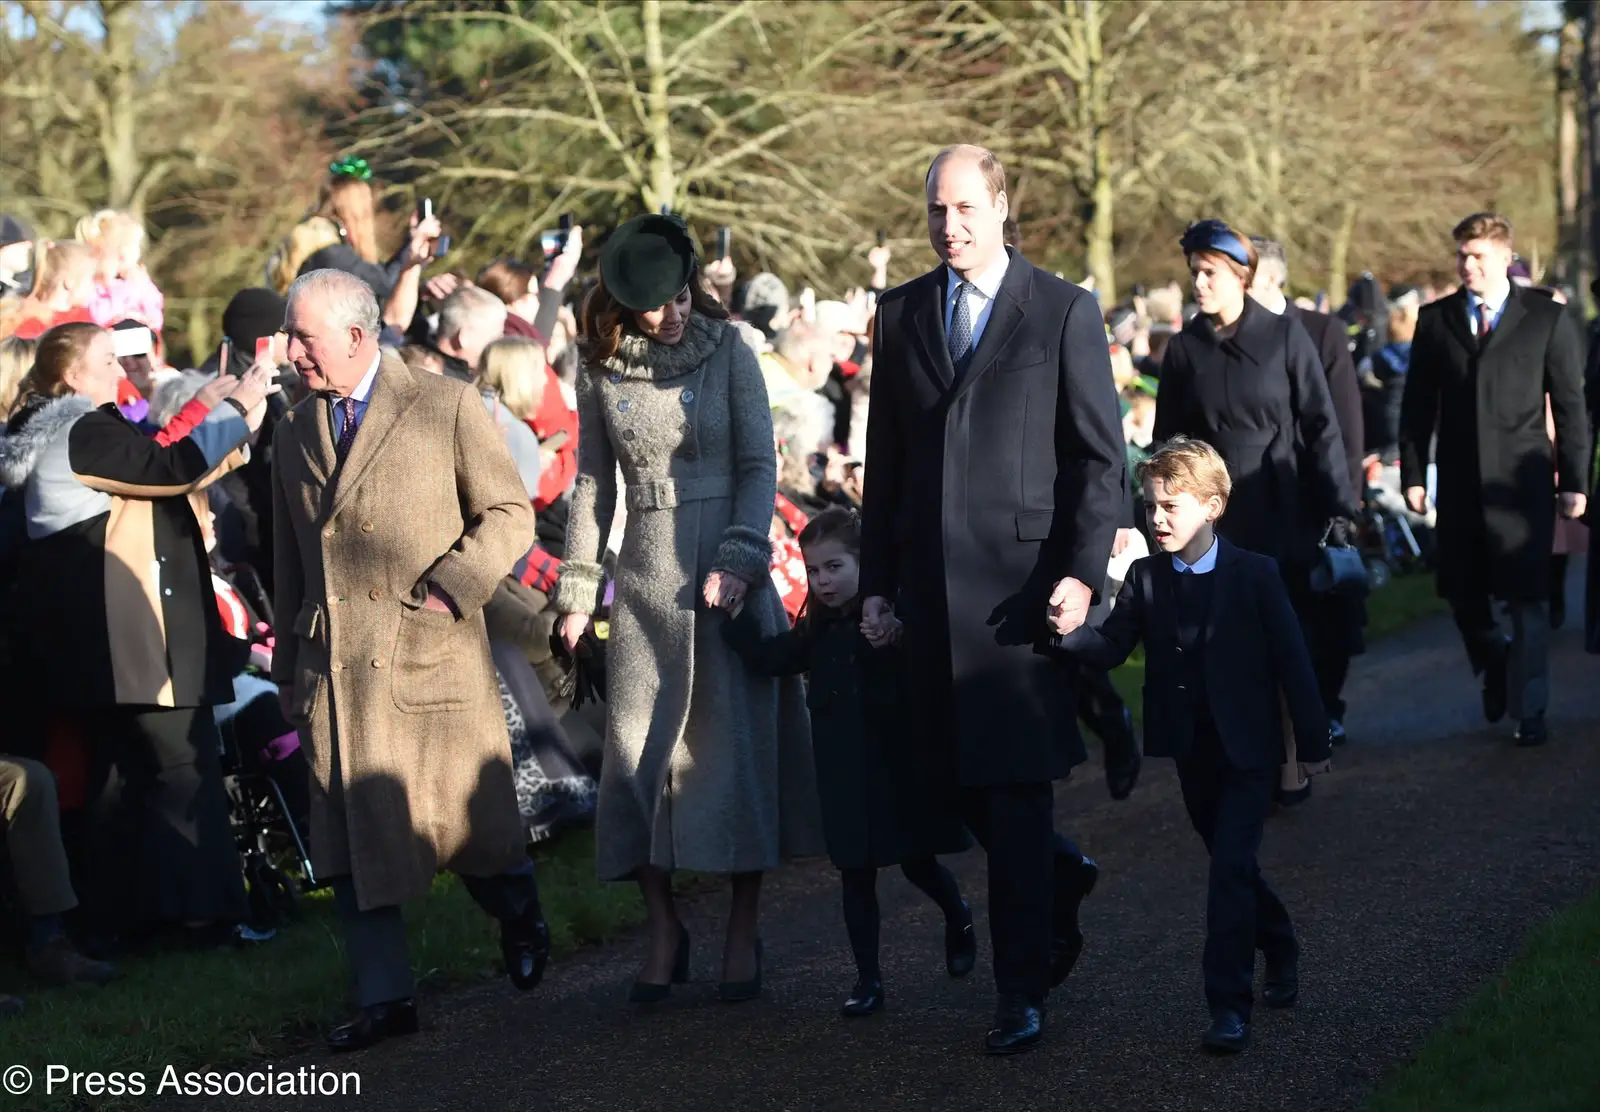 Prince George and Princess charlotte made debut at Christmas Church Service with Duke and Duchess of Cambridge